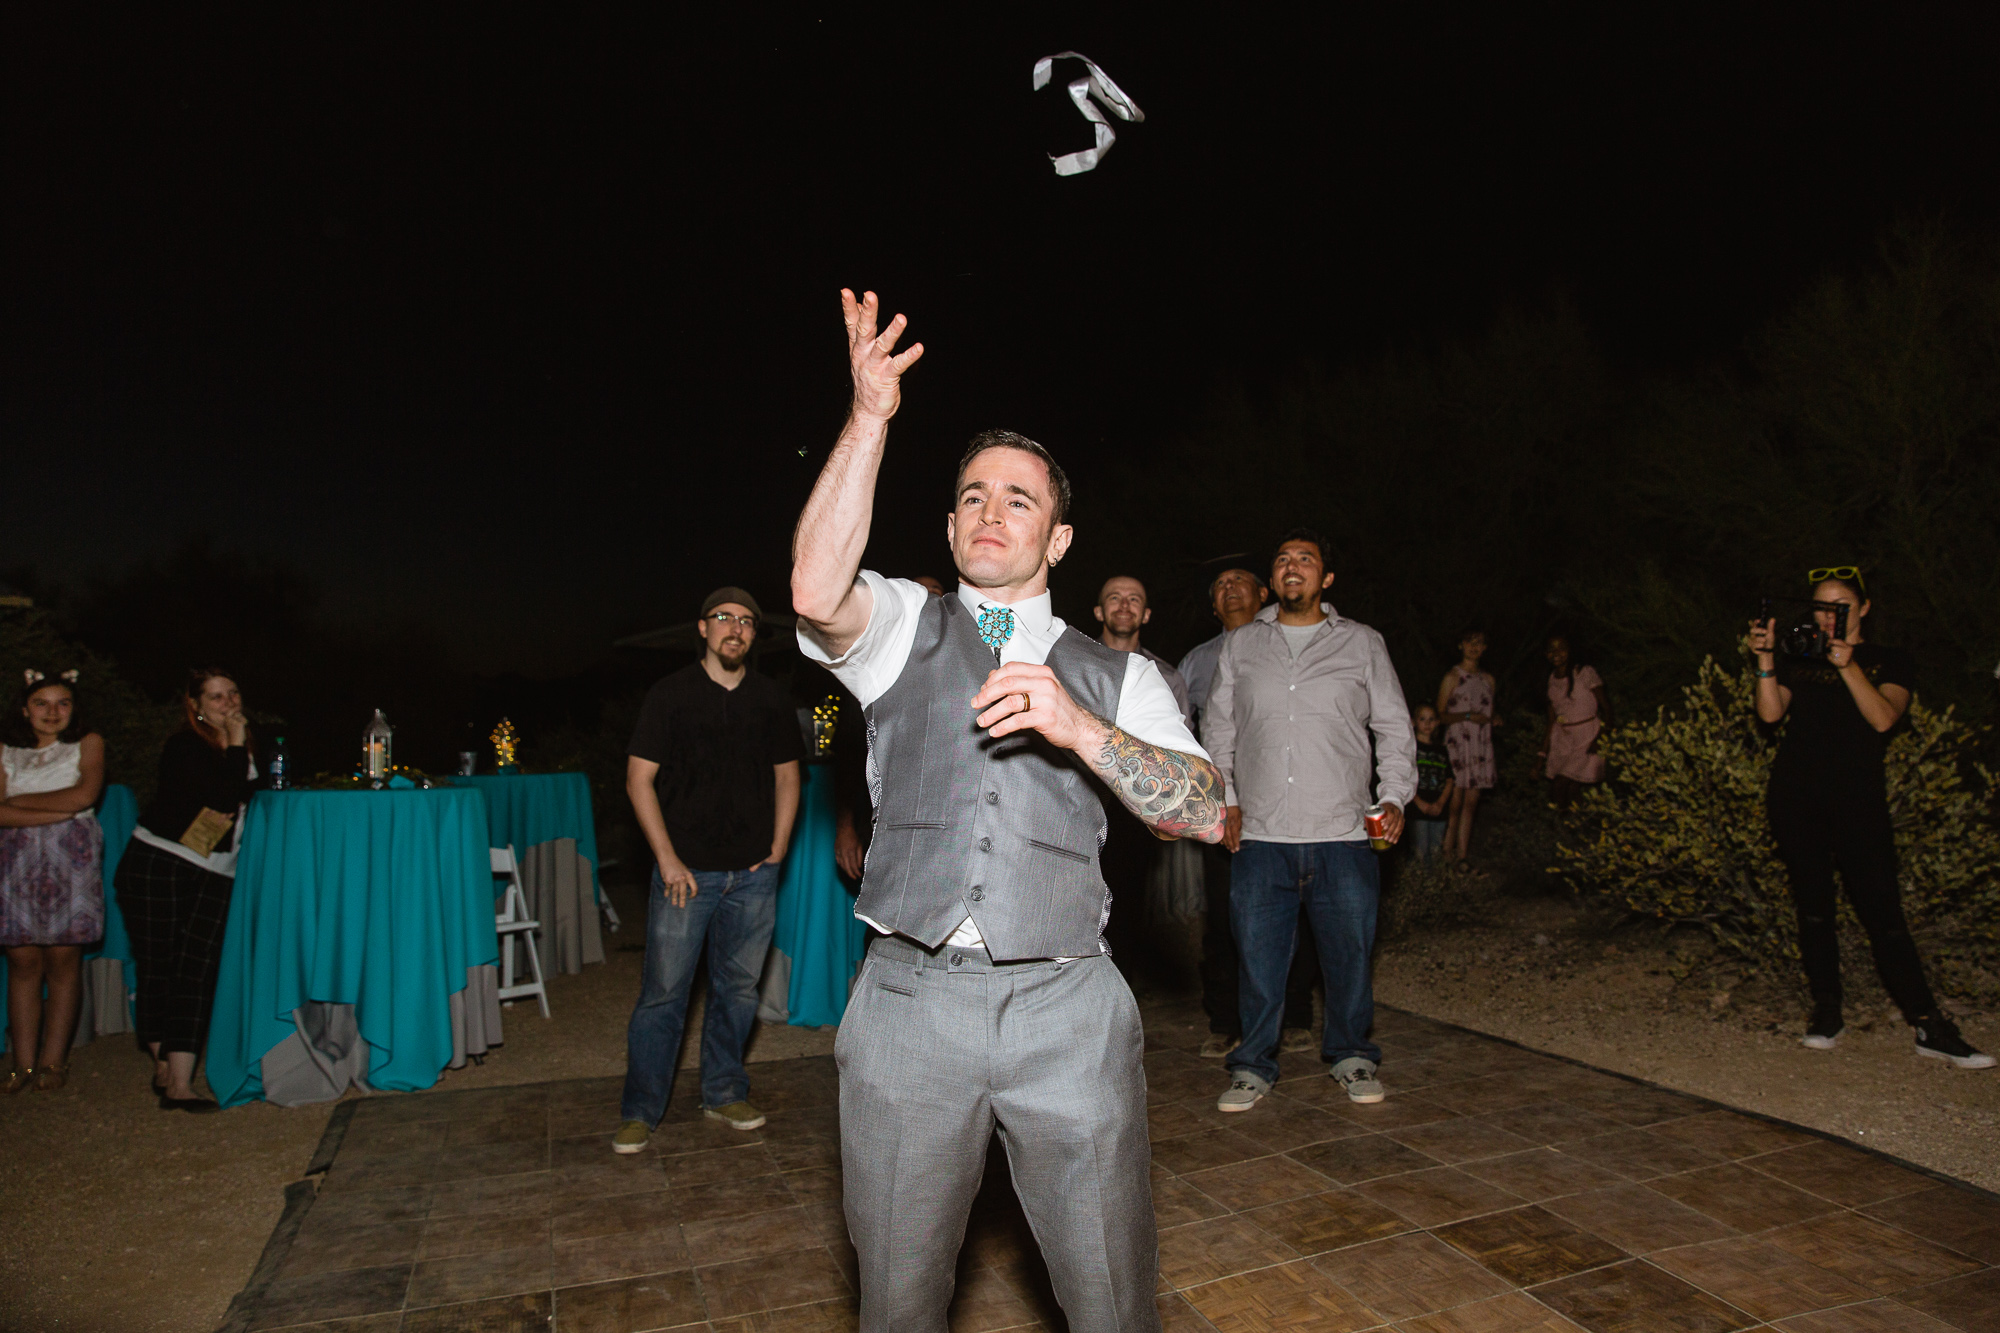 Groom doing the garter toss by PMA Photography.